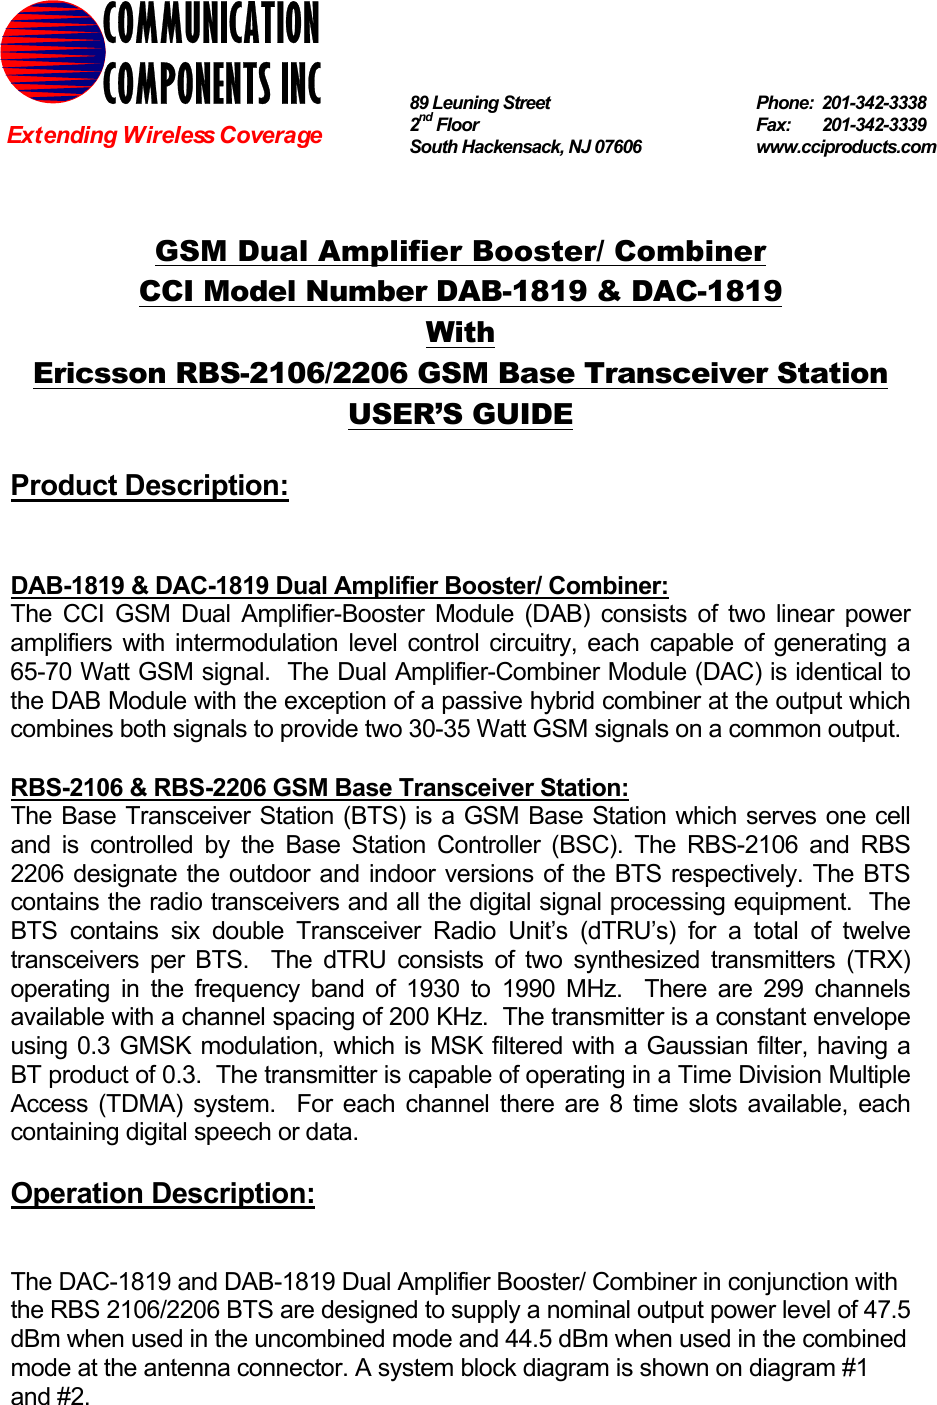   GSM Dual Amplifier Booster/ Combiner CCI Model Number DAB-1819 &amp; DAC-1819 With Ericsson RBS-2106/2206 GSM Base Transceiver Station USER’S GUIDE  Product Description:   DAB-1819 &amp; DAC-1819 Dual Amplifier Booster/ Combiner: The CCI GSM Dual Amplifier-Booster Module (DAB) consists of two linear power amplifiers with intermodulation level control circuitry, each capable of generating a 65-70 Watt GSM signal.  The Dual Amplifier-Combiner Module (DAC) is identical to the DAB Module with the exception of a passive hybrid combiner at the output which combines both signals to provide two 30-35 Watt GSM signals on a common output.  RBS-2106 &amp; RBS-2206 GSM Base Transceiver Station: The Base Transceiver Station (BTS) is a GSM Base Station which serves one cell and is controlled by the Base Station Controller (BSC). The RBS-2106 and RBS 2206 designate the outdoor and indoor versions of the BTS respectively. The BTS contains the radio transceivers and all the digital signal processing equipment.  The BTS contains six double Transceiver Radio Unit’s (dTRU’s) for a total of twelve transceivers per BTS.  The dTRU consists of two synthesized transmitters (TRX) operating in the frequency band of 1930 to 1990 MHz.  There are 299 channels available with a channel spacing of 200 KHz.  The transmitter is a constant envelope using 0.3 GMSK modulation, which is MSK filtered with a Gaussian filter, having a BT product of 0.3.  The transmitter is capable of operating in a Time Division Multiple Access (TDMA) system.  For each channel there are 8 time slots available, each containing digital speech or data.  Operation Description:   The DAC-1819 and DAB-1819 Dual Amplifier Booster/ Combiner in conjunction with the RBS 2106/2206 BTS are designed to supply a nominal output power level of 47.5  dBm when used in the uncombined mode and 44.5 dBm when used in the combined mode at the antenna connector. A system block diagram is shown on diagram #1 and #2. COMMUNICATION COMPONENTS INC Extending Wireless Coverage 89 Leuning Street   Phone: 201-342-3338 2nd Floor  Fax:   201-342-3339 South Hackensack, NJ 07606   www.cciproducts.com 